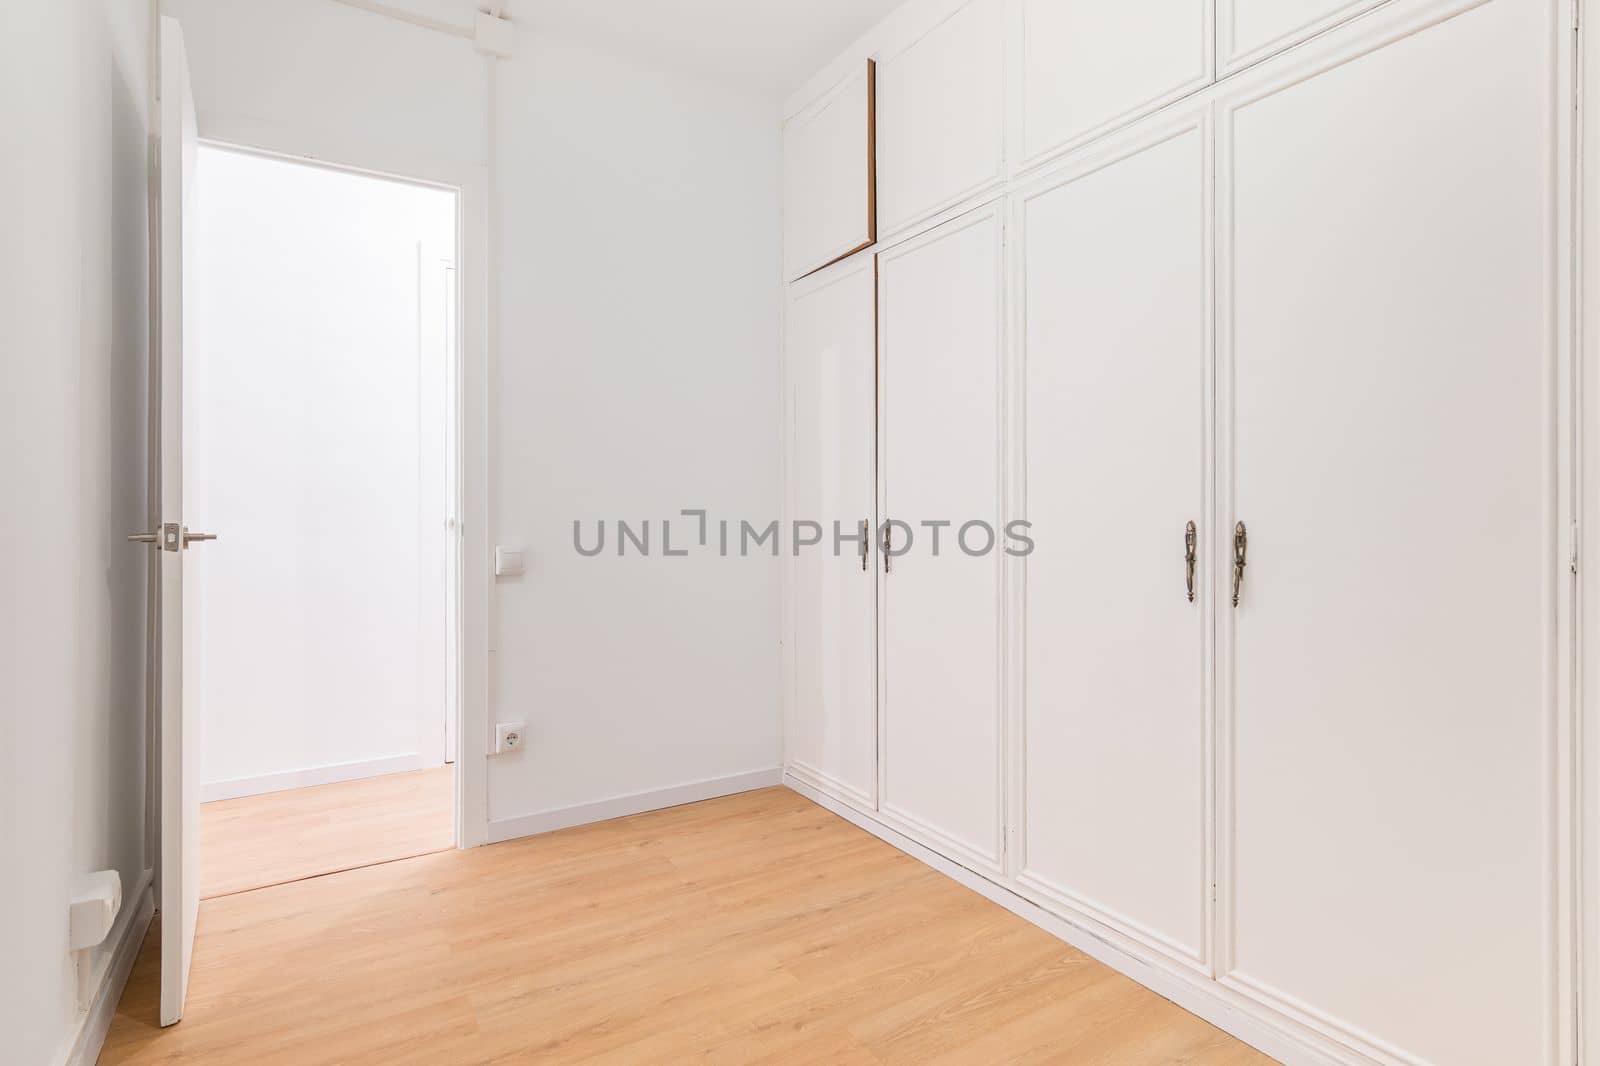 Built-in spacious wardrobes with white paneling and door open to another room with wooden laminate flooring. Concept of organizing storage and laconic interior.